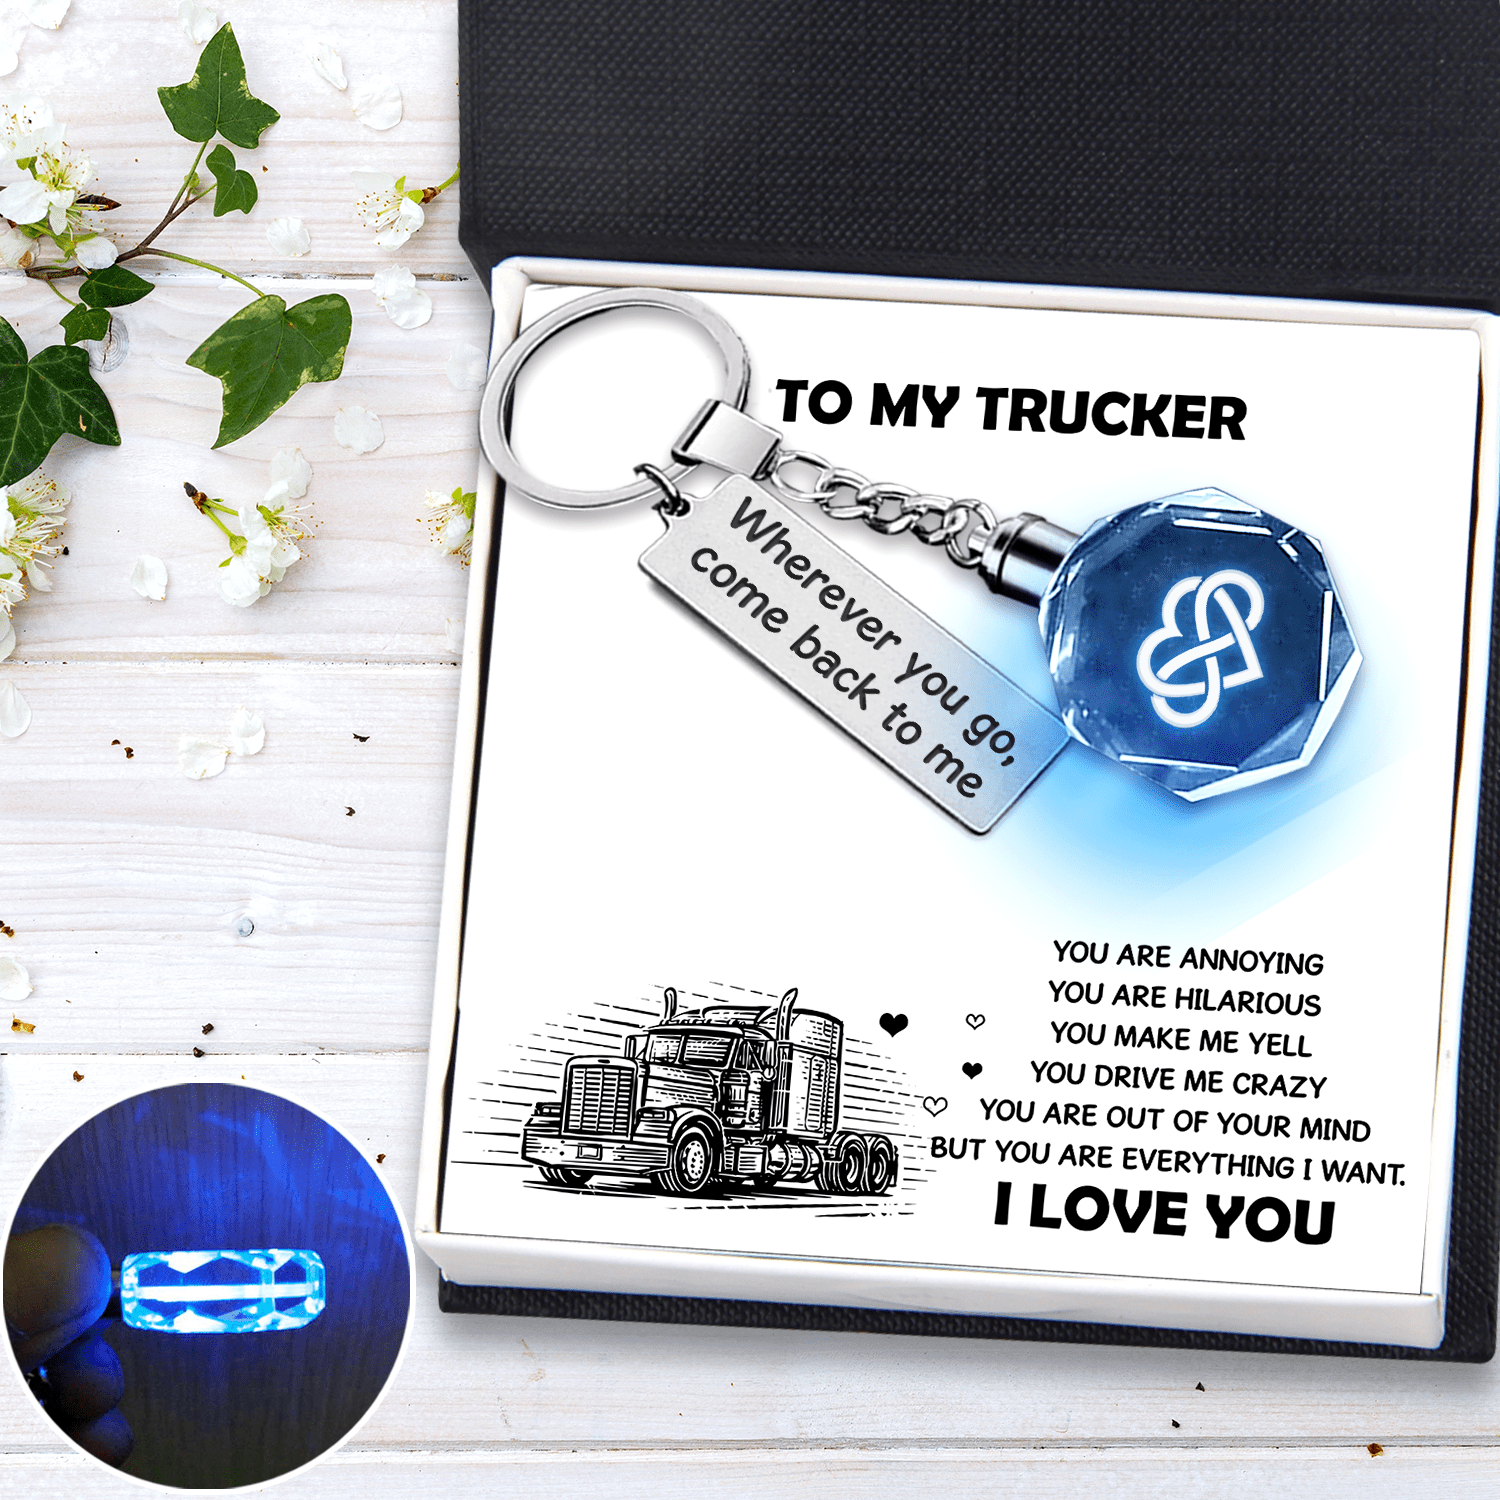 Led Light Keychain - Family - To My Trucker - Wherever You Go, Come Back To Me - Gkwl26005